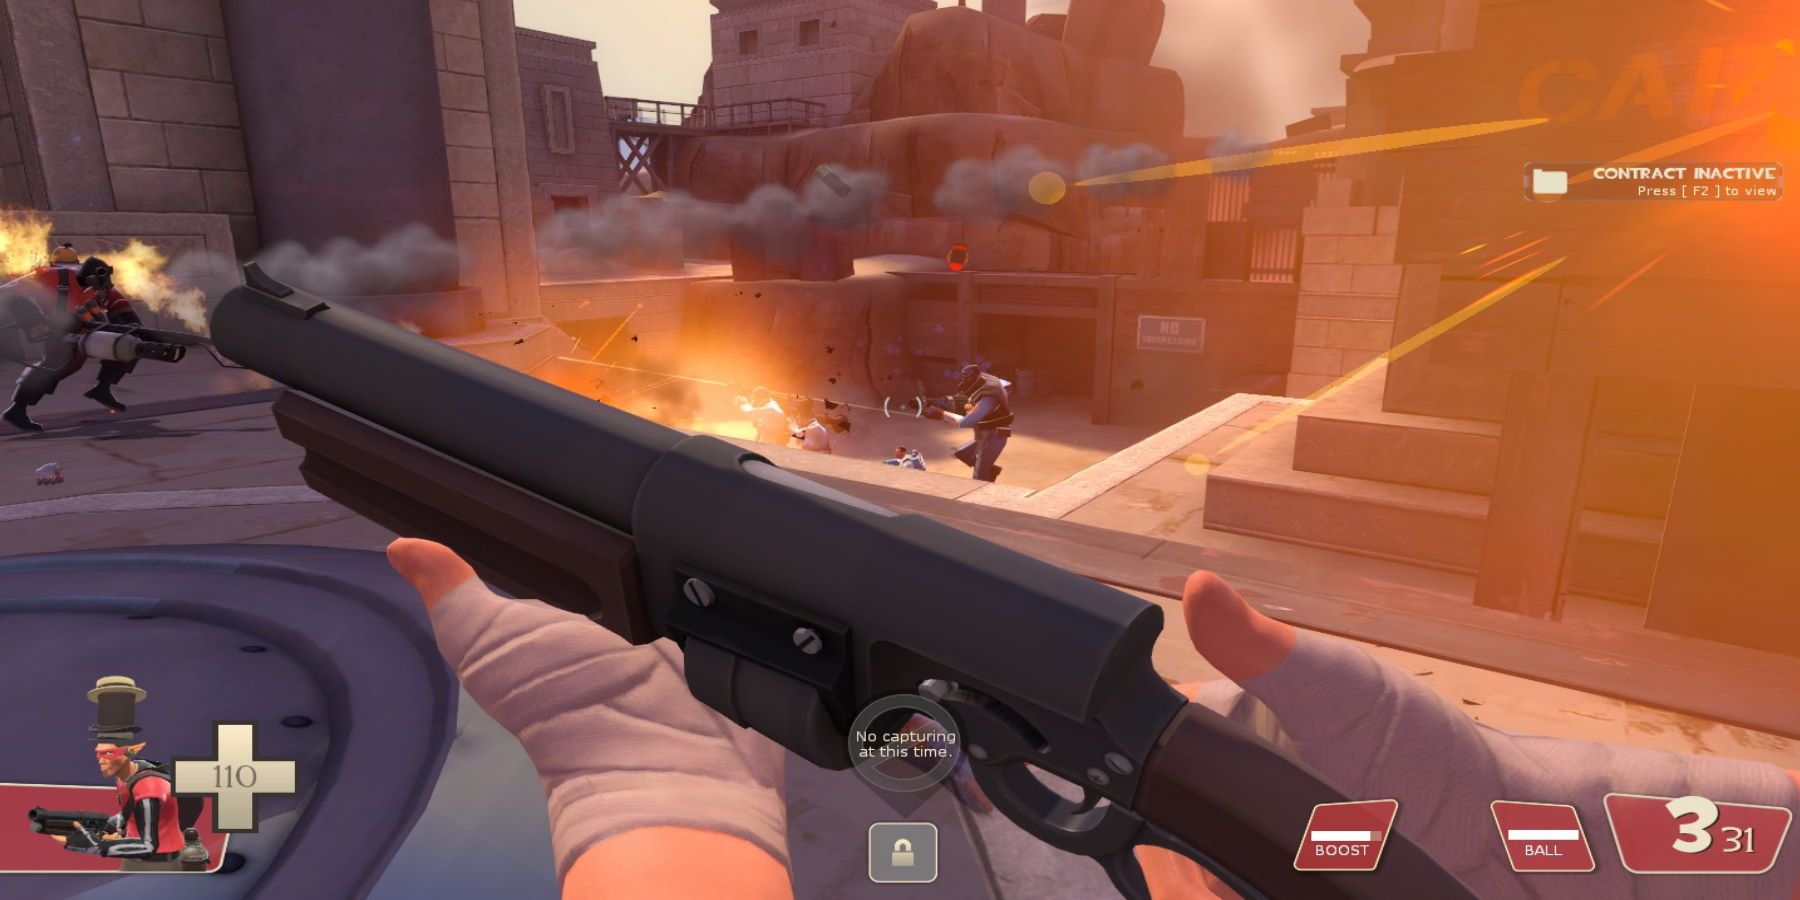 Scout reloading a shotgun amidst an explosion going off on the control point while facing the enemy base